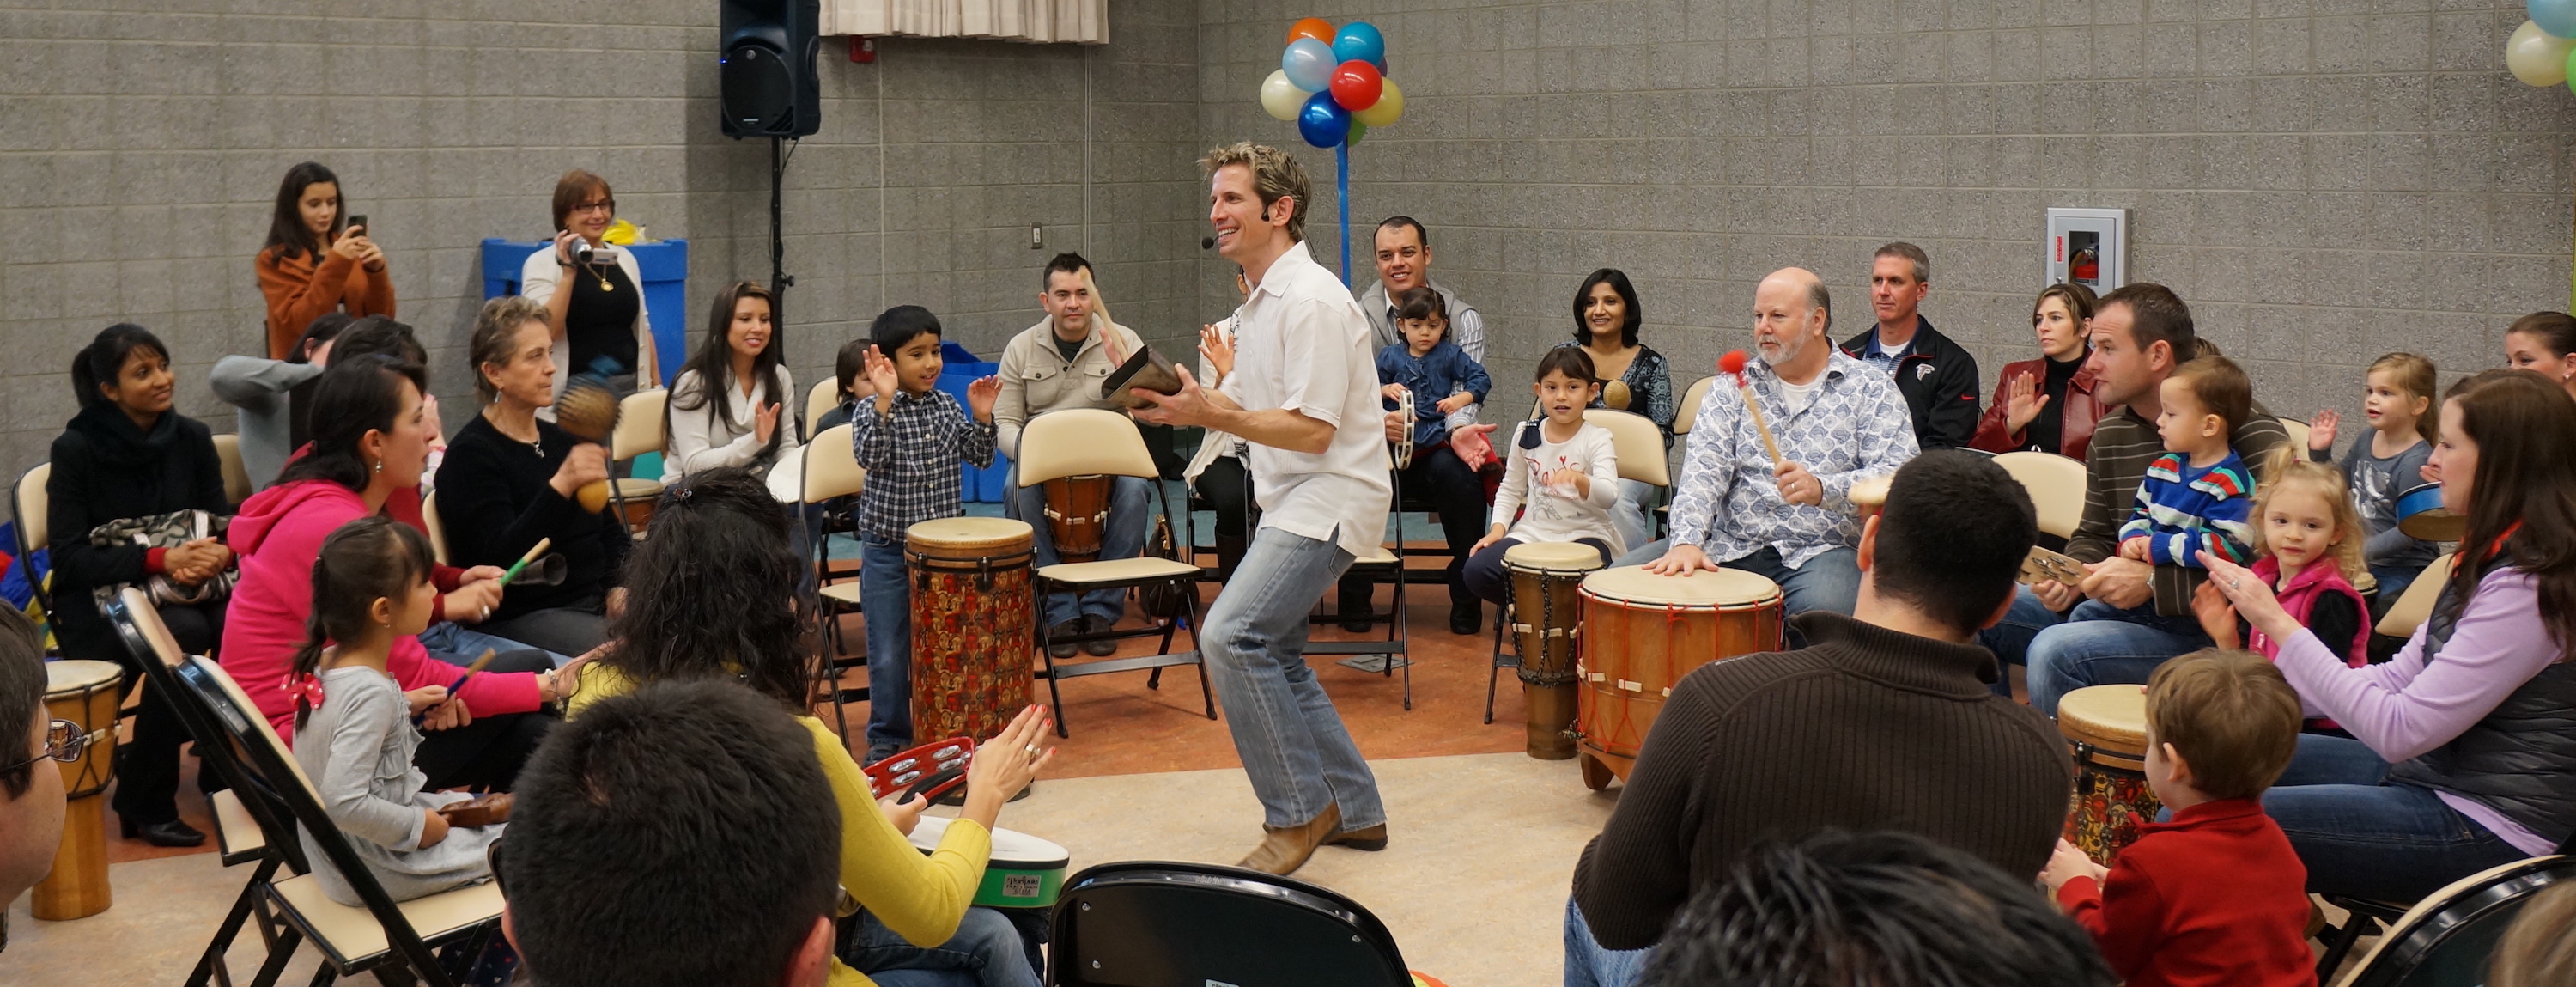 Celebrate the spirit of your community gathering with a drum circle.